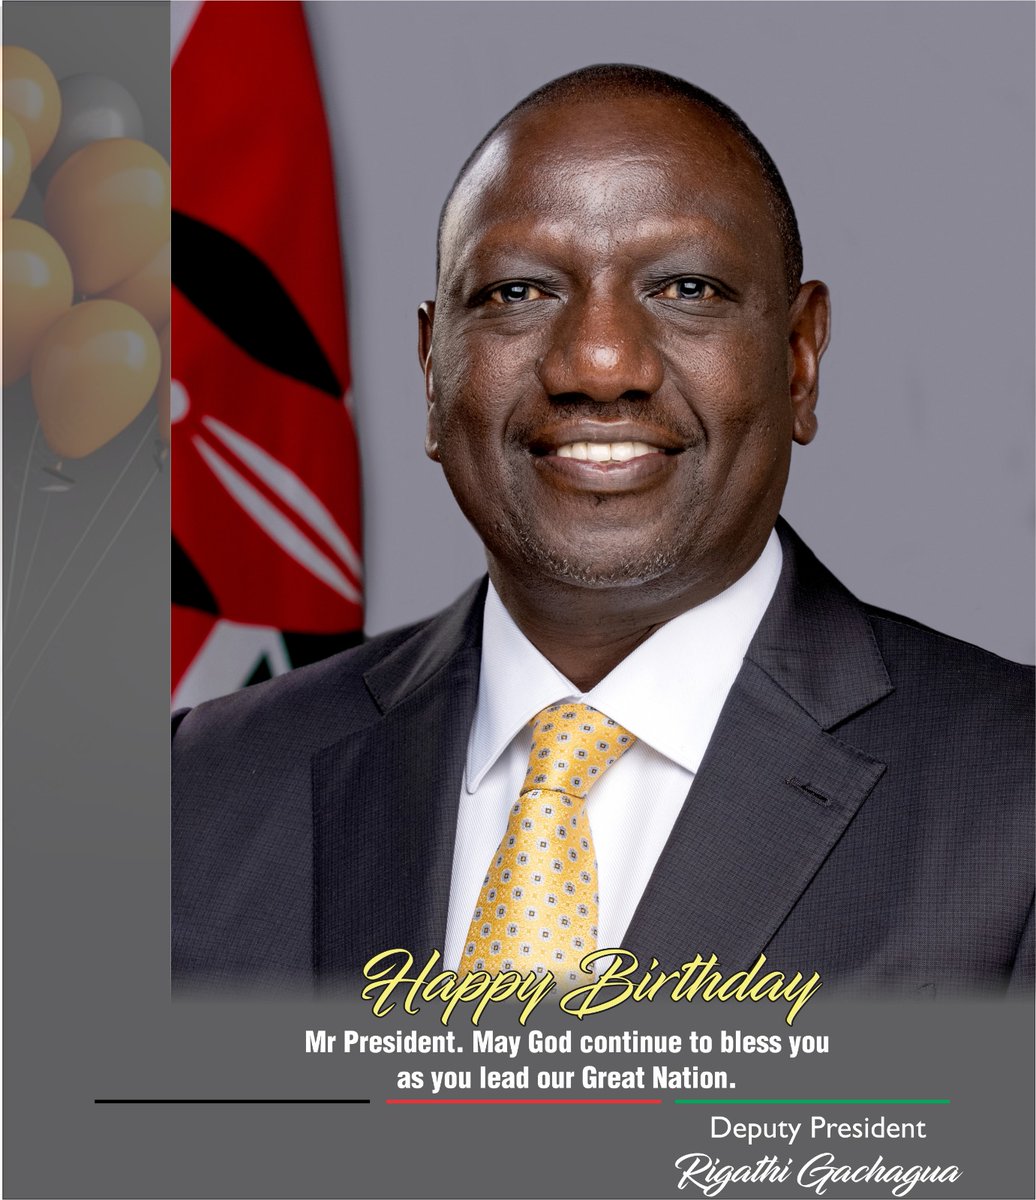 Your Excellency, Dr @WilliamsRuto;